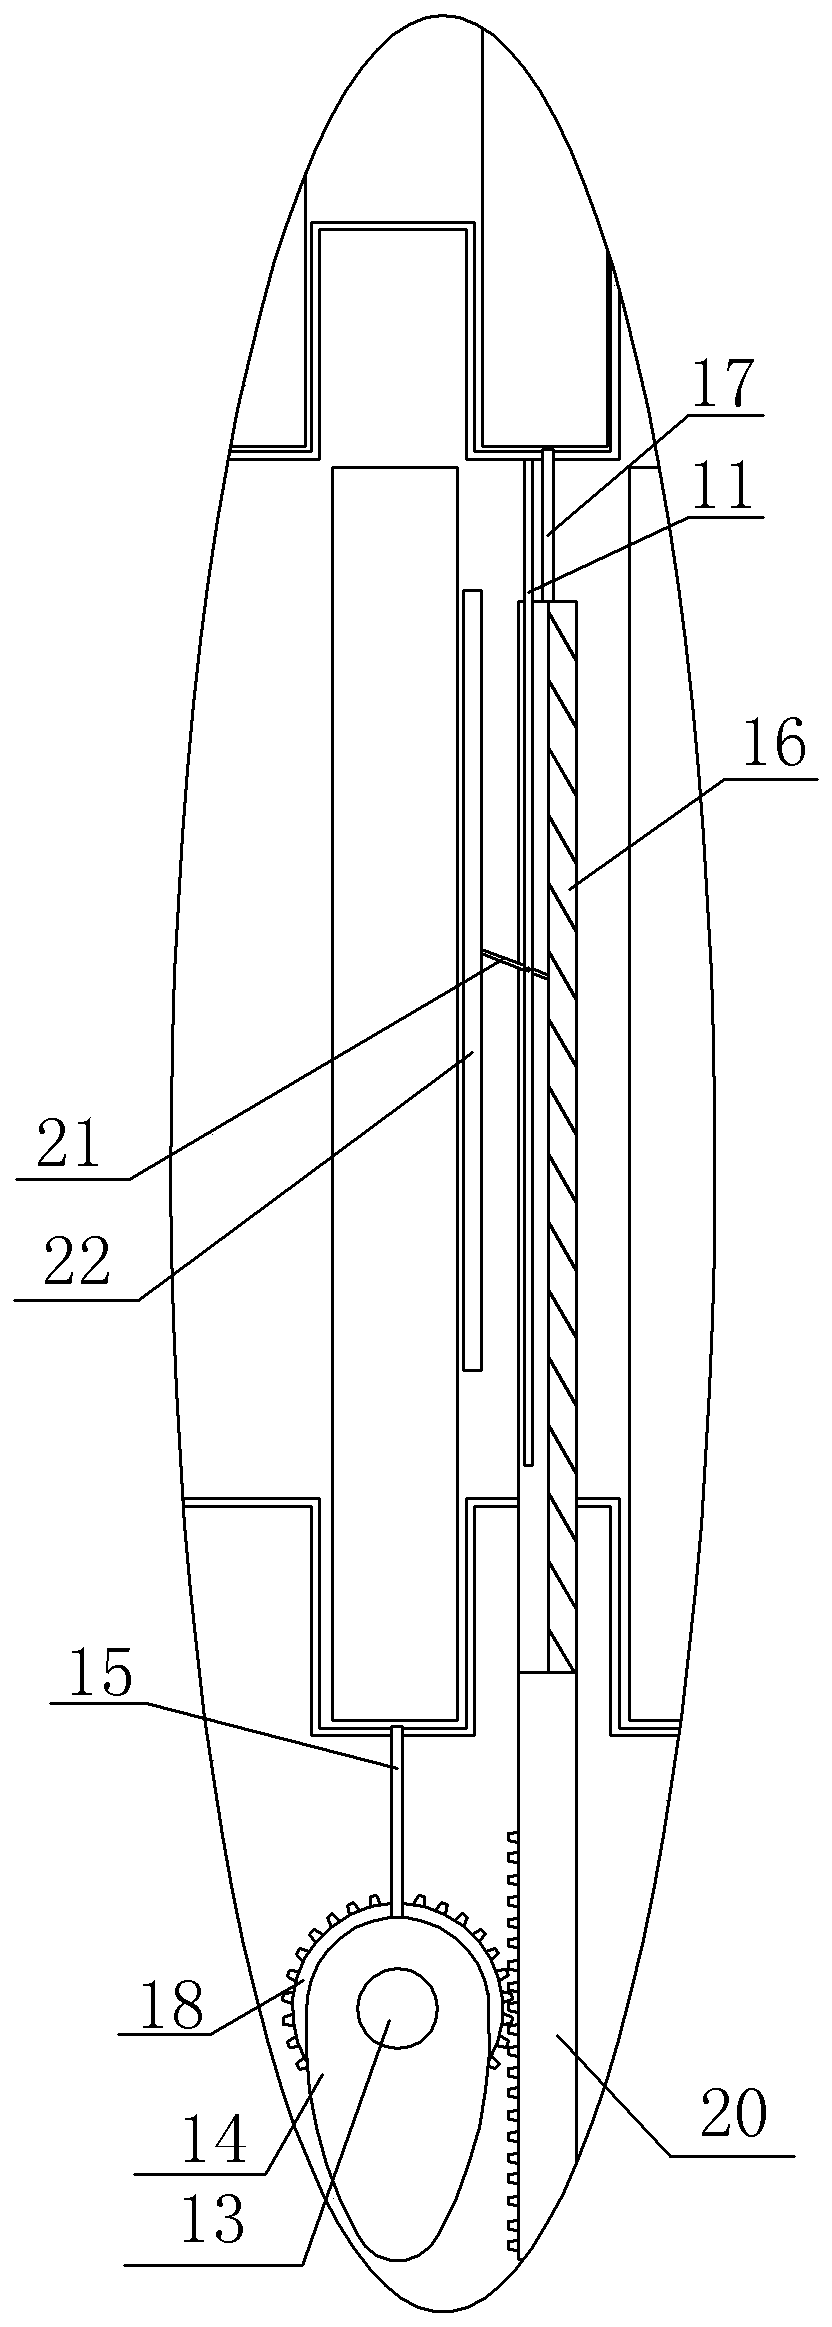 Multi-layer plate drying device